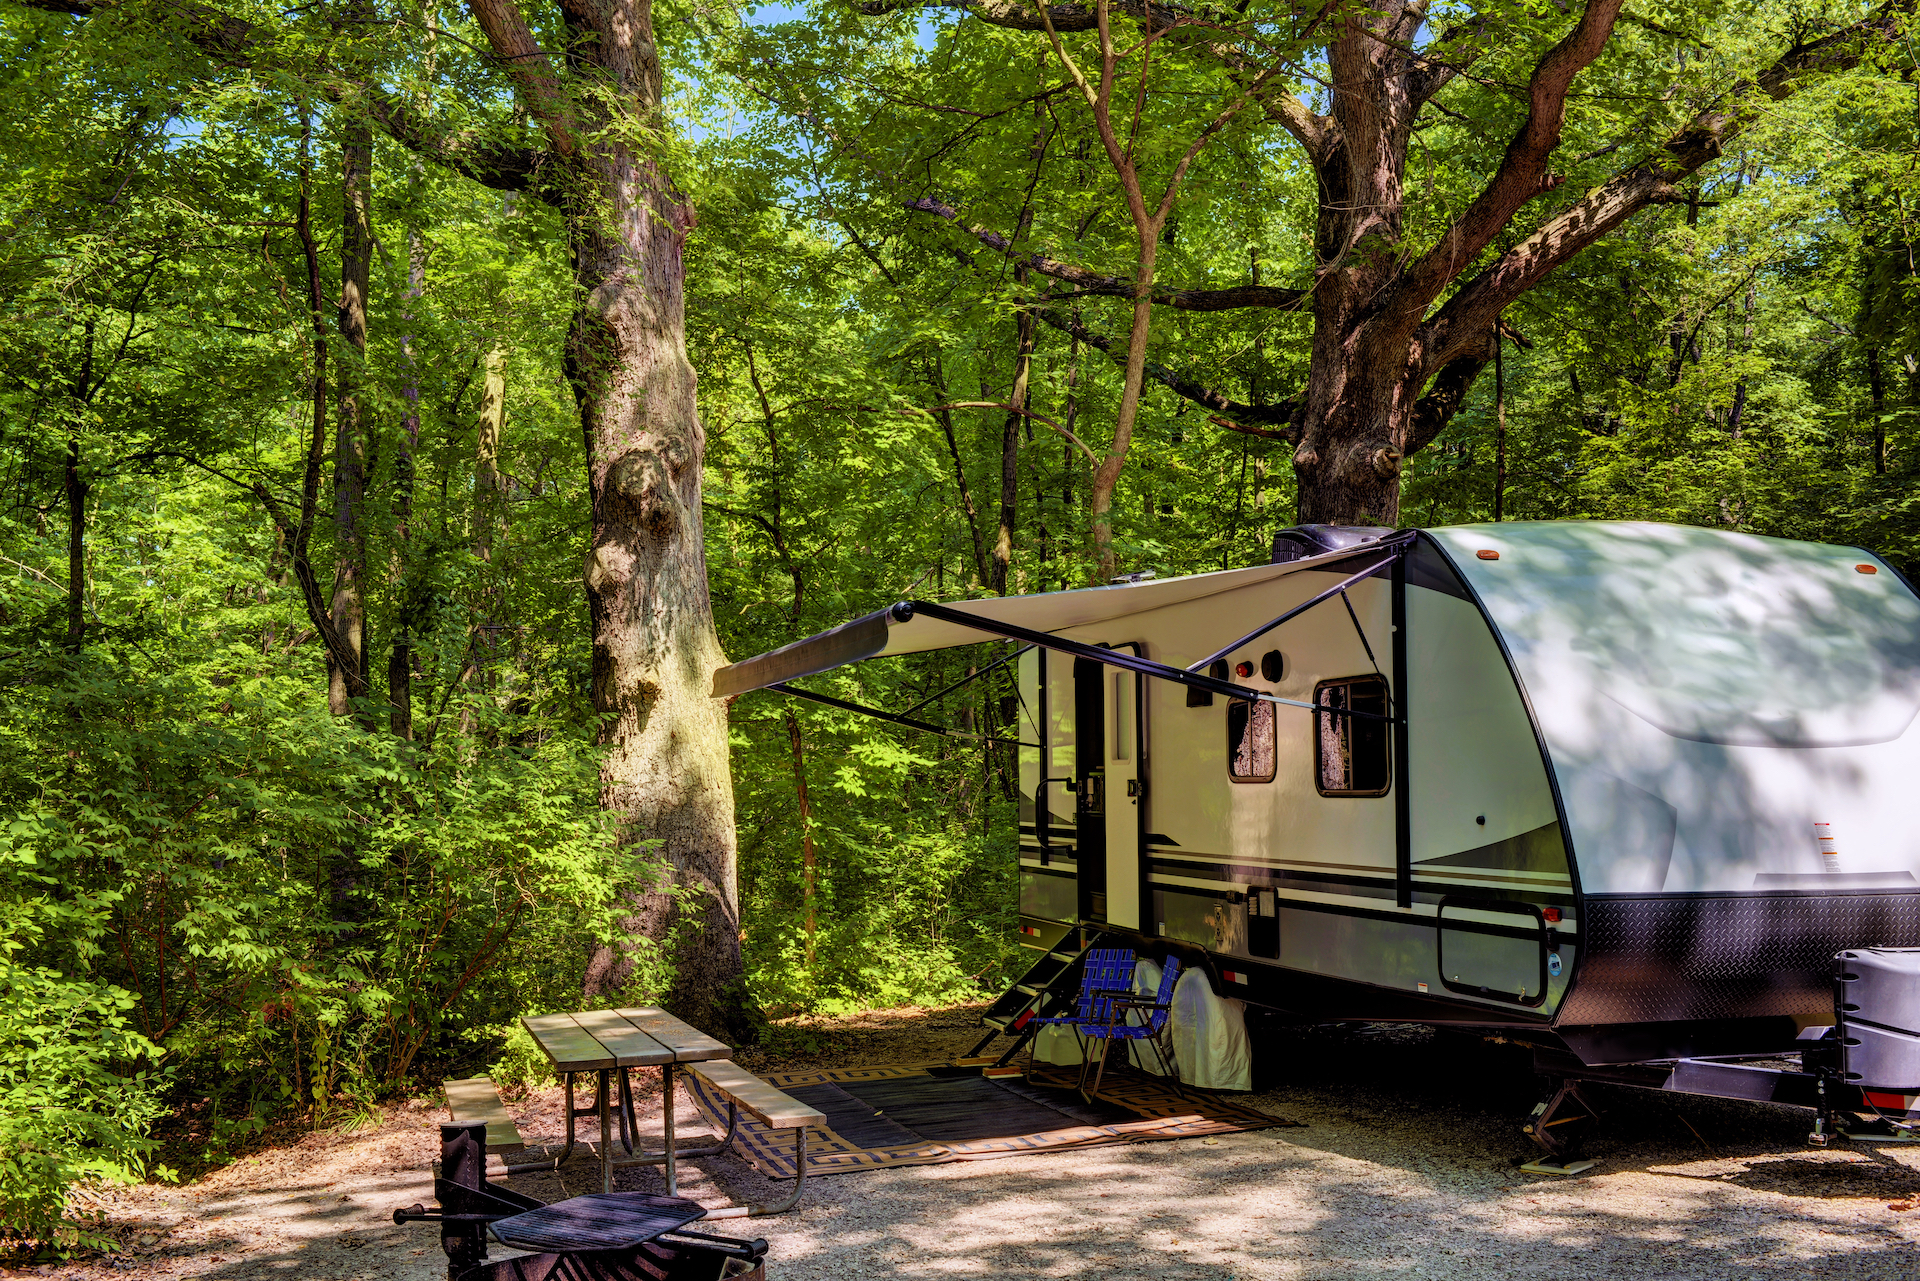 Checklist: How to Set Up and Break Down Your Campsite